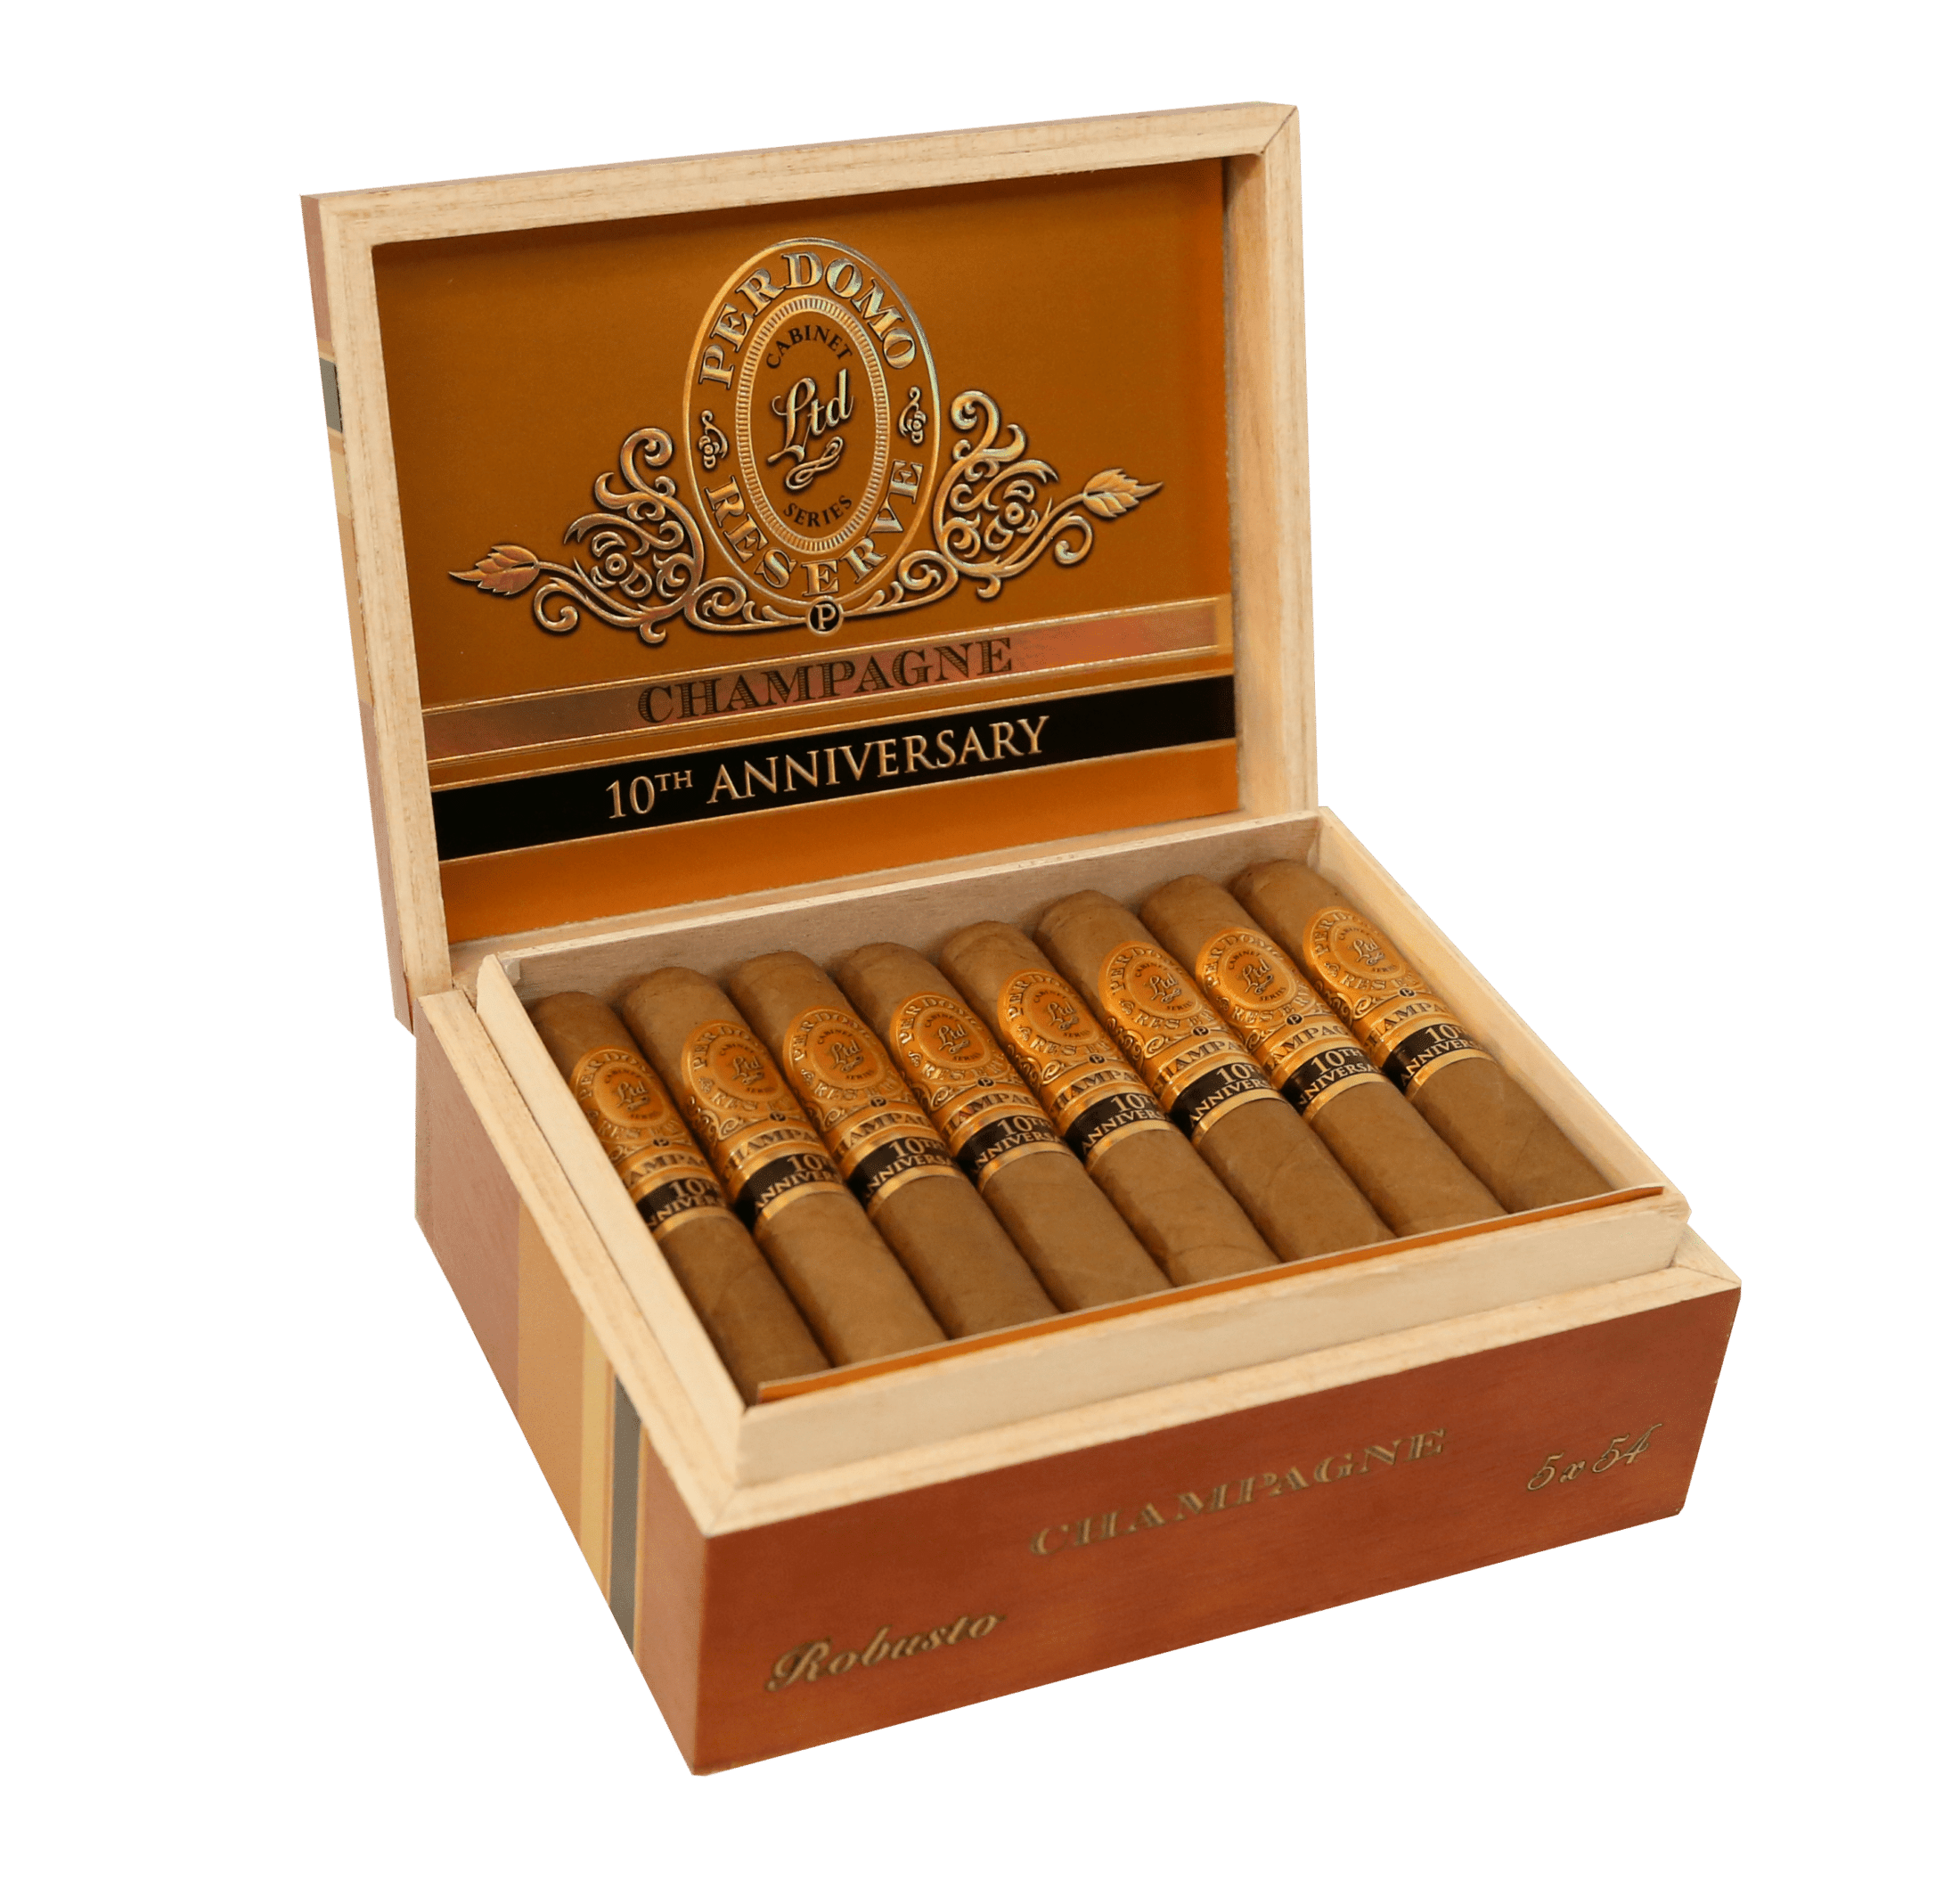 Open box of 25 count Perdomo Reserve 10th Anniversary Champagne Robusto cigars